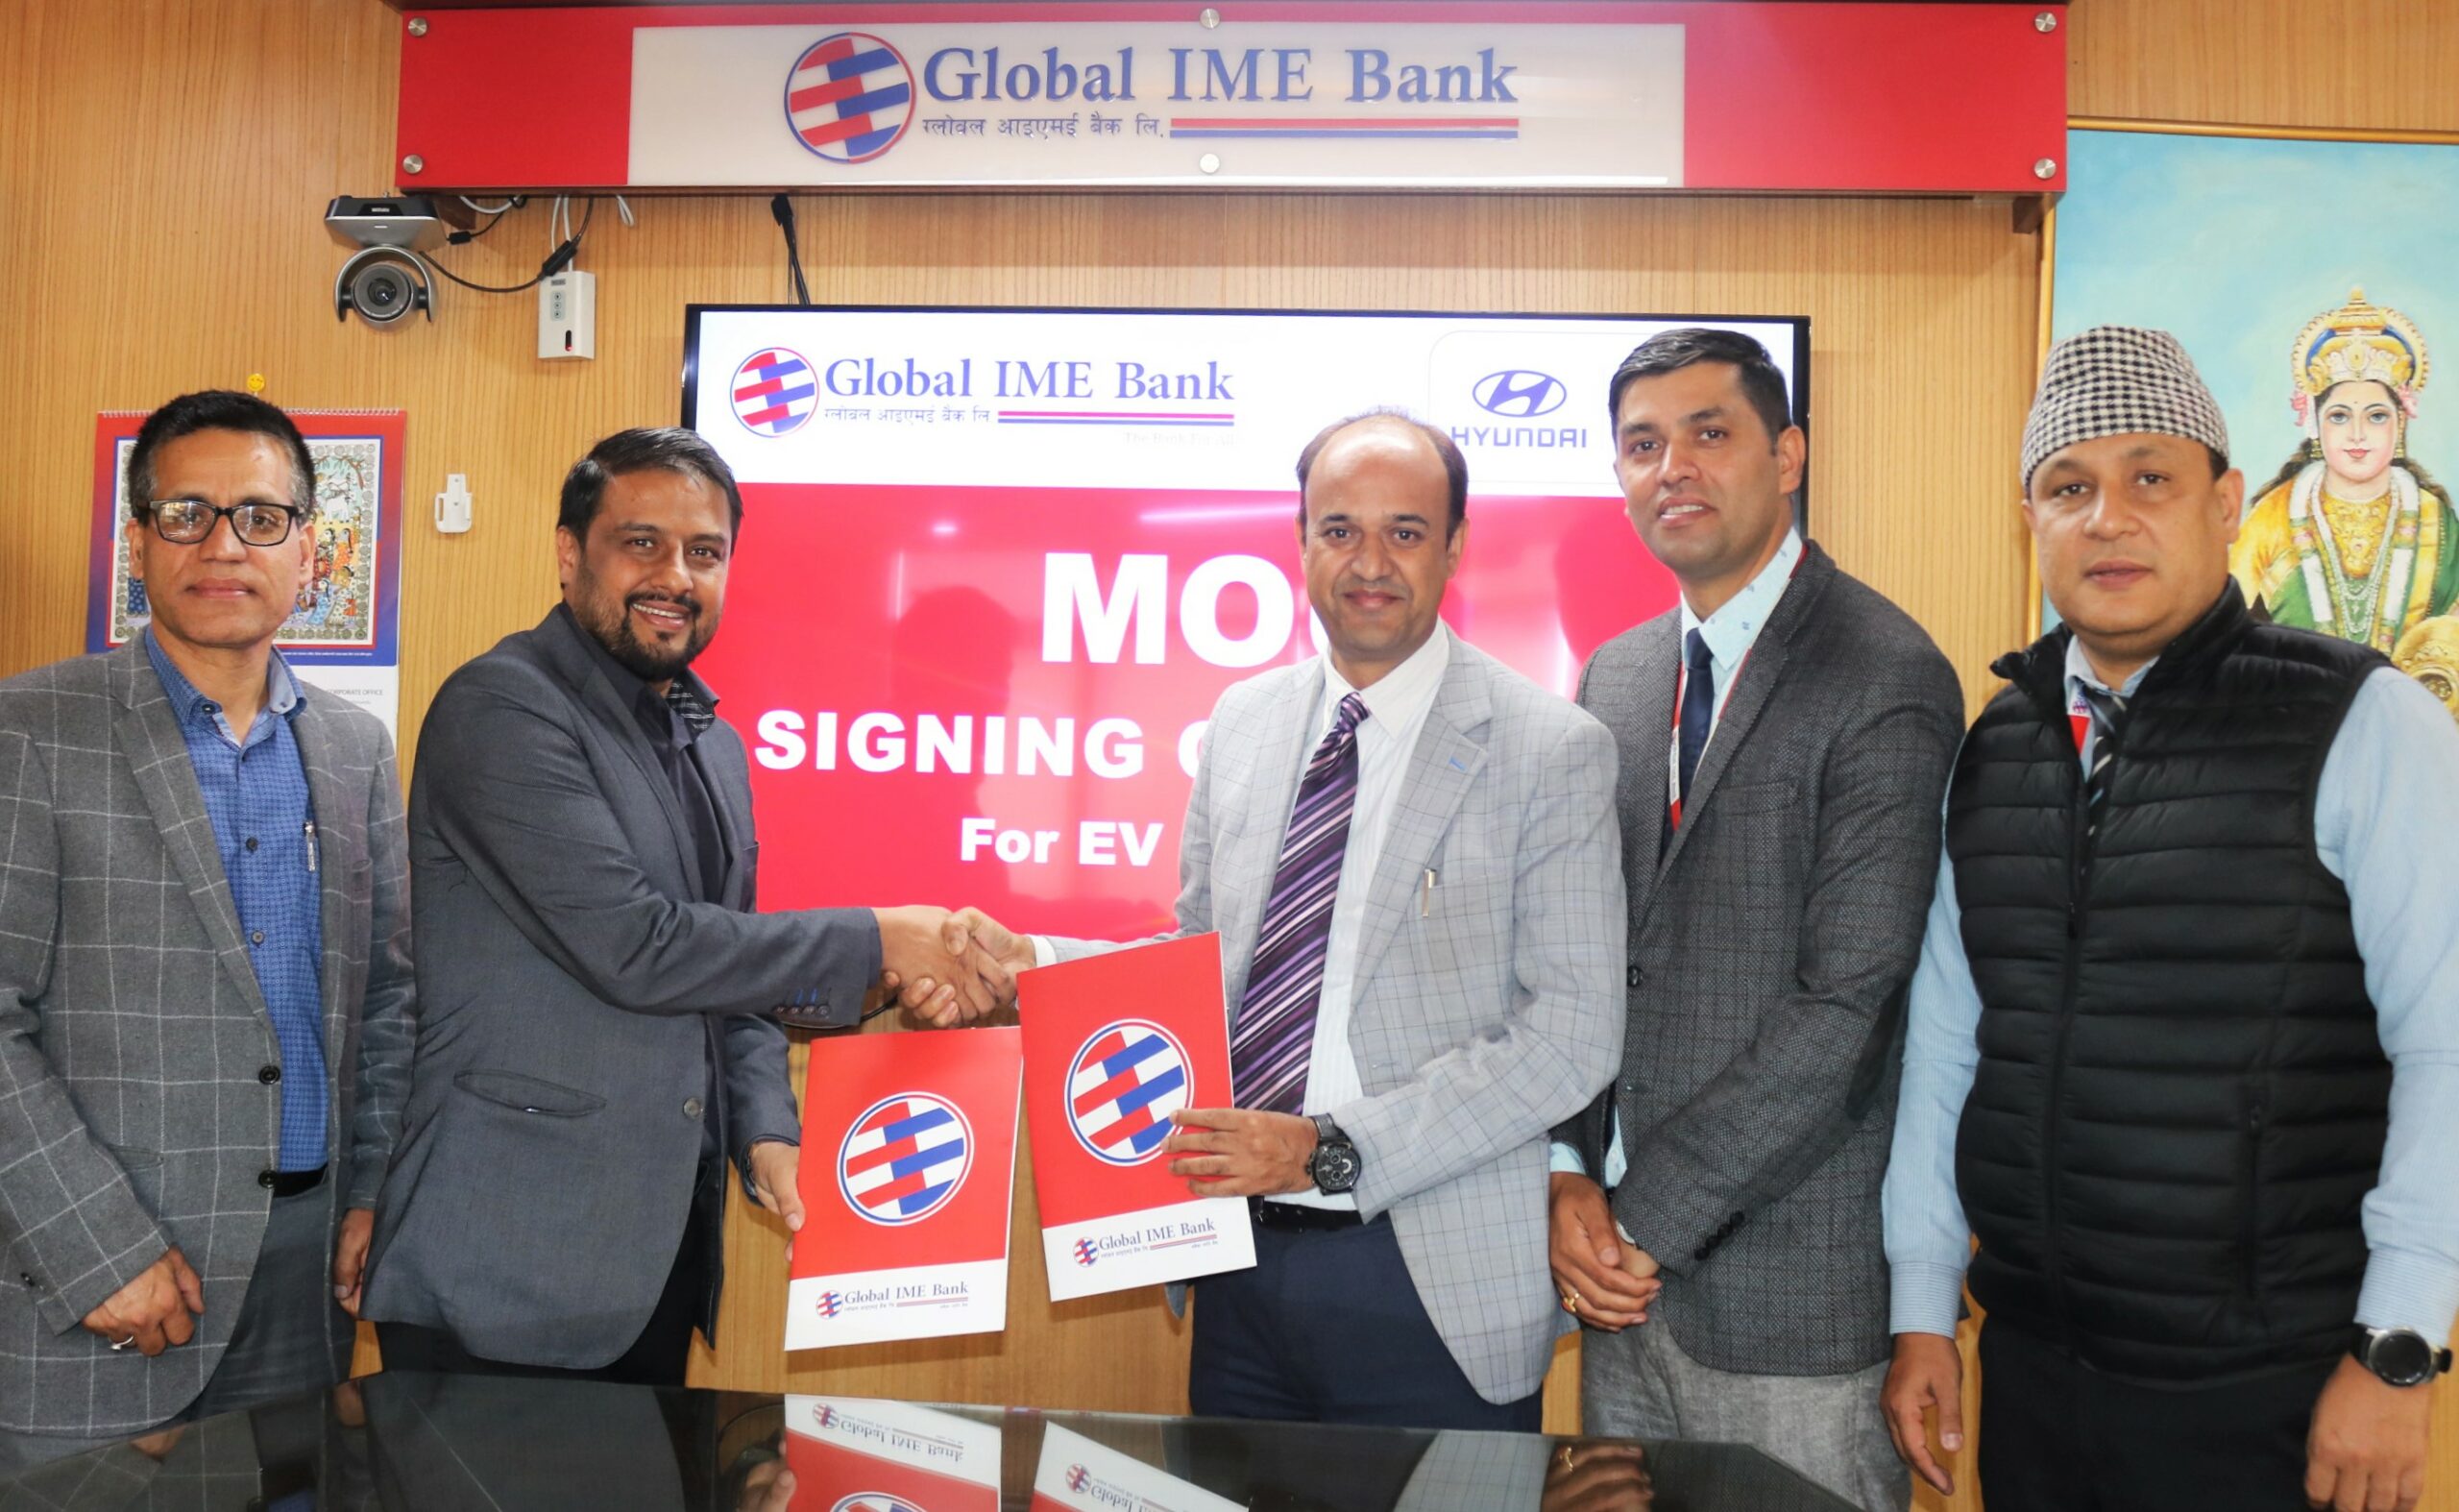 Laxmi Intercontinental & Global IME sign an MOU to extend financing on EVs